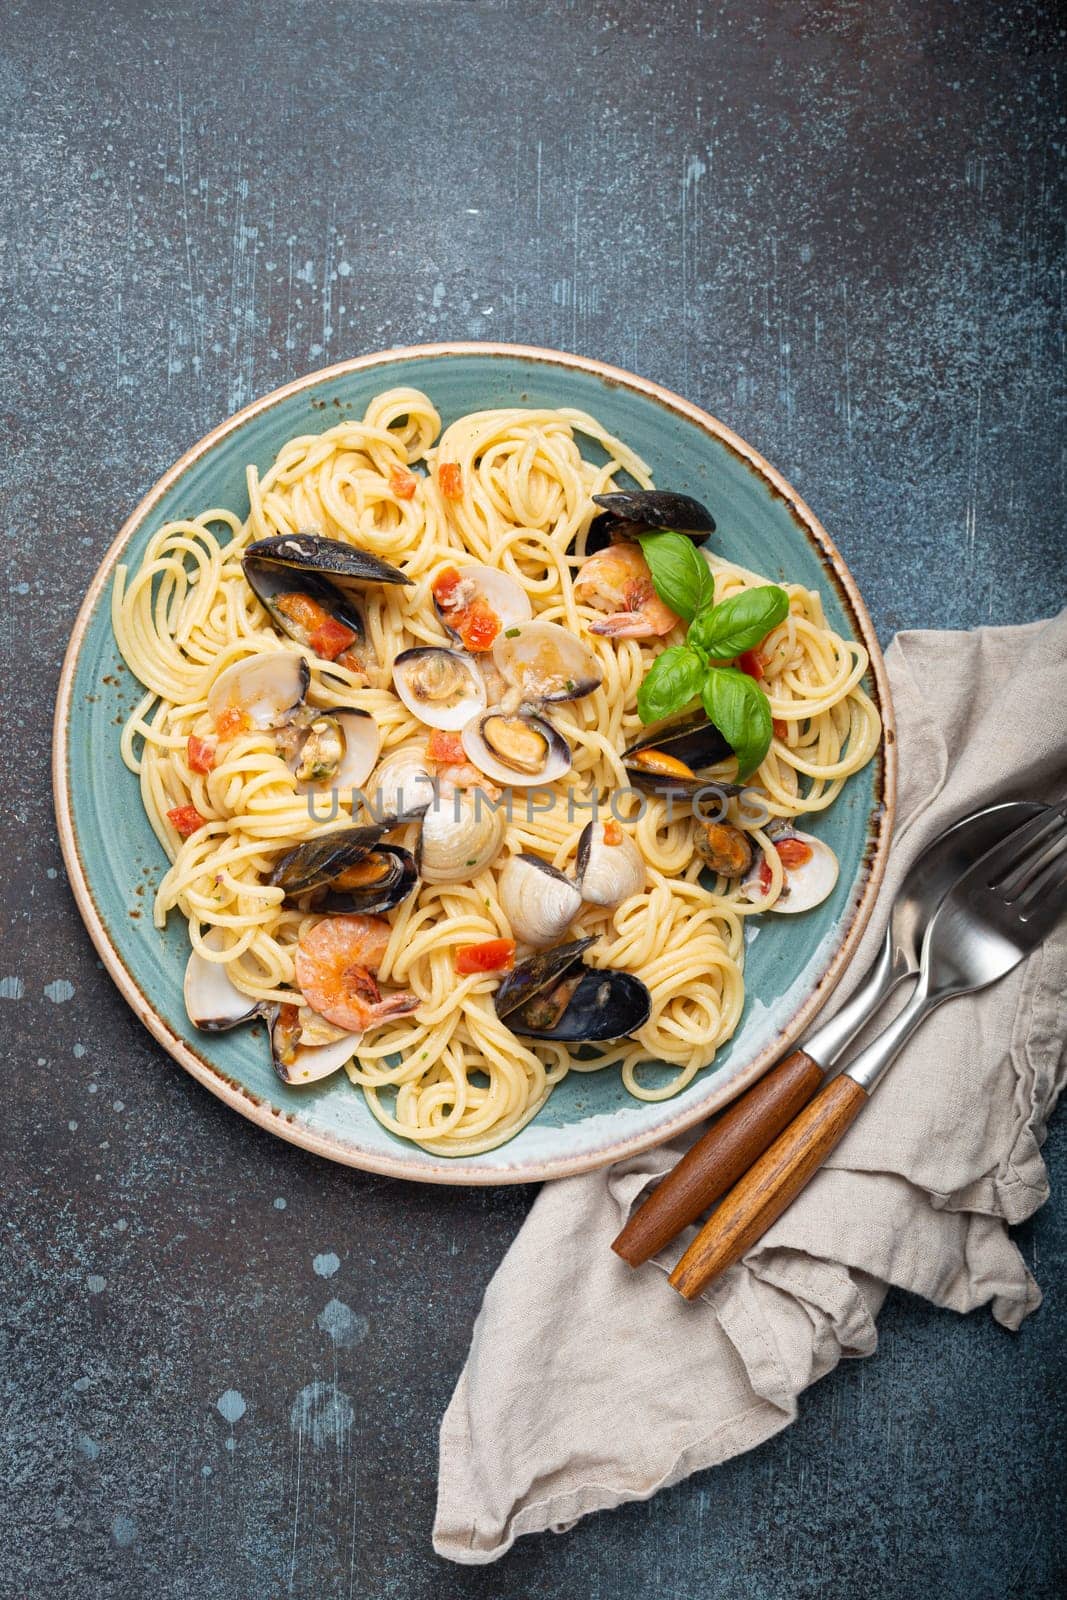 Italian seafood pasta spaghetti with mussels, shrimps, clams in tomato sauce with green basil on plate on rustic blue concrete background overhead. Mediterranean cuisine